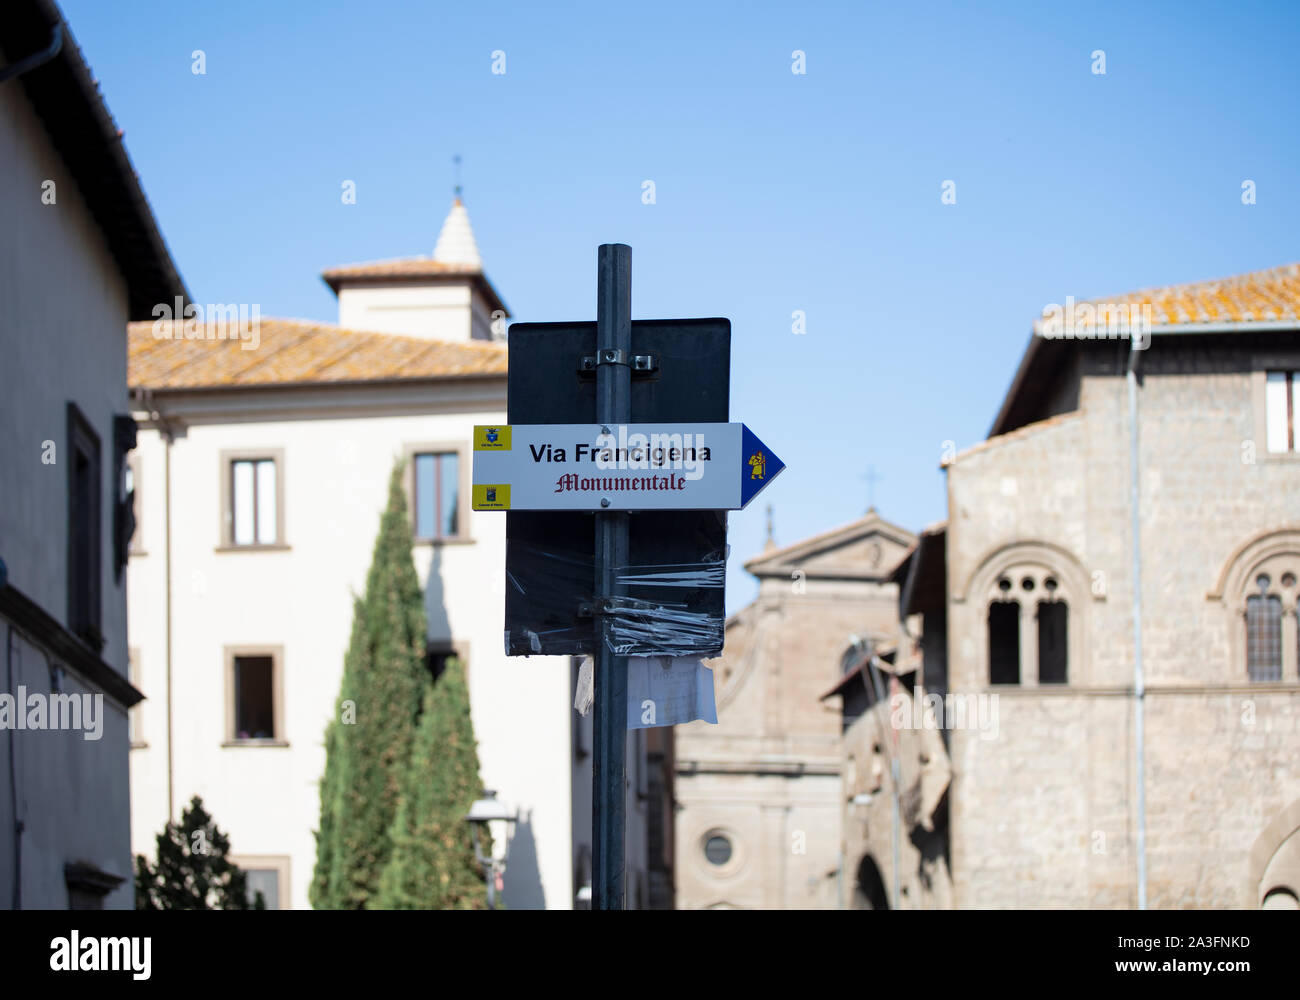 Road sign for the Via Francigena, an ancient pilgrimage walk between Canterbury and  Rome. In the background the cathedral in Viterbo can be seen. Stock Photo